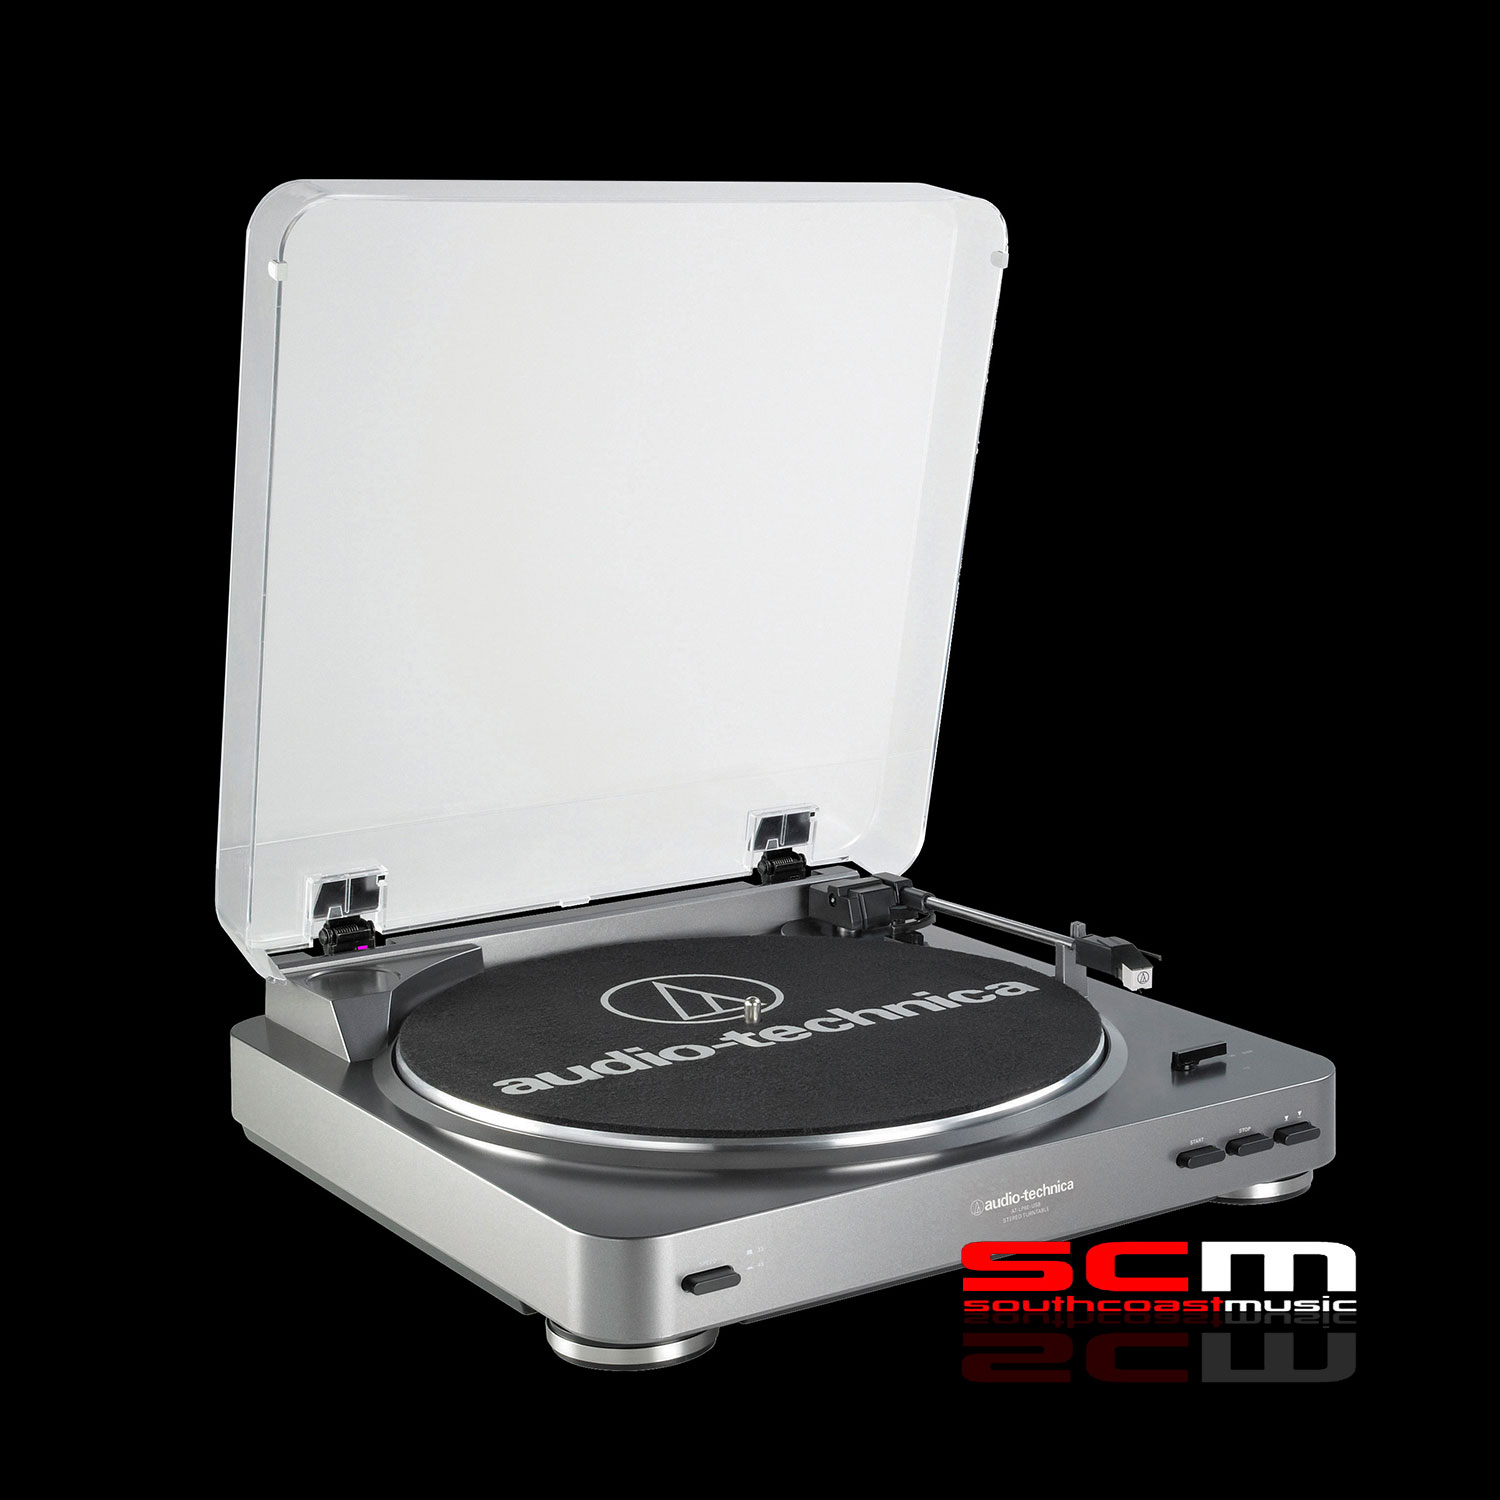 audio-technica ATLP60-USB Fully Automatic Turntable with Digital Recording Software